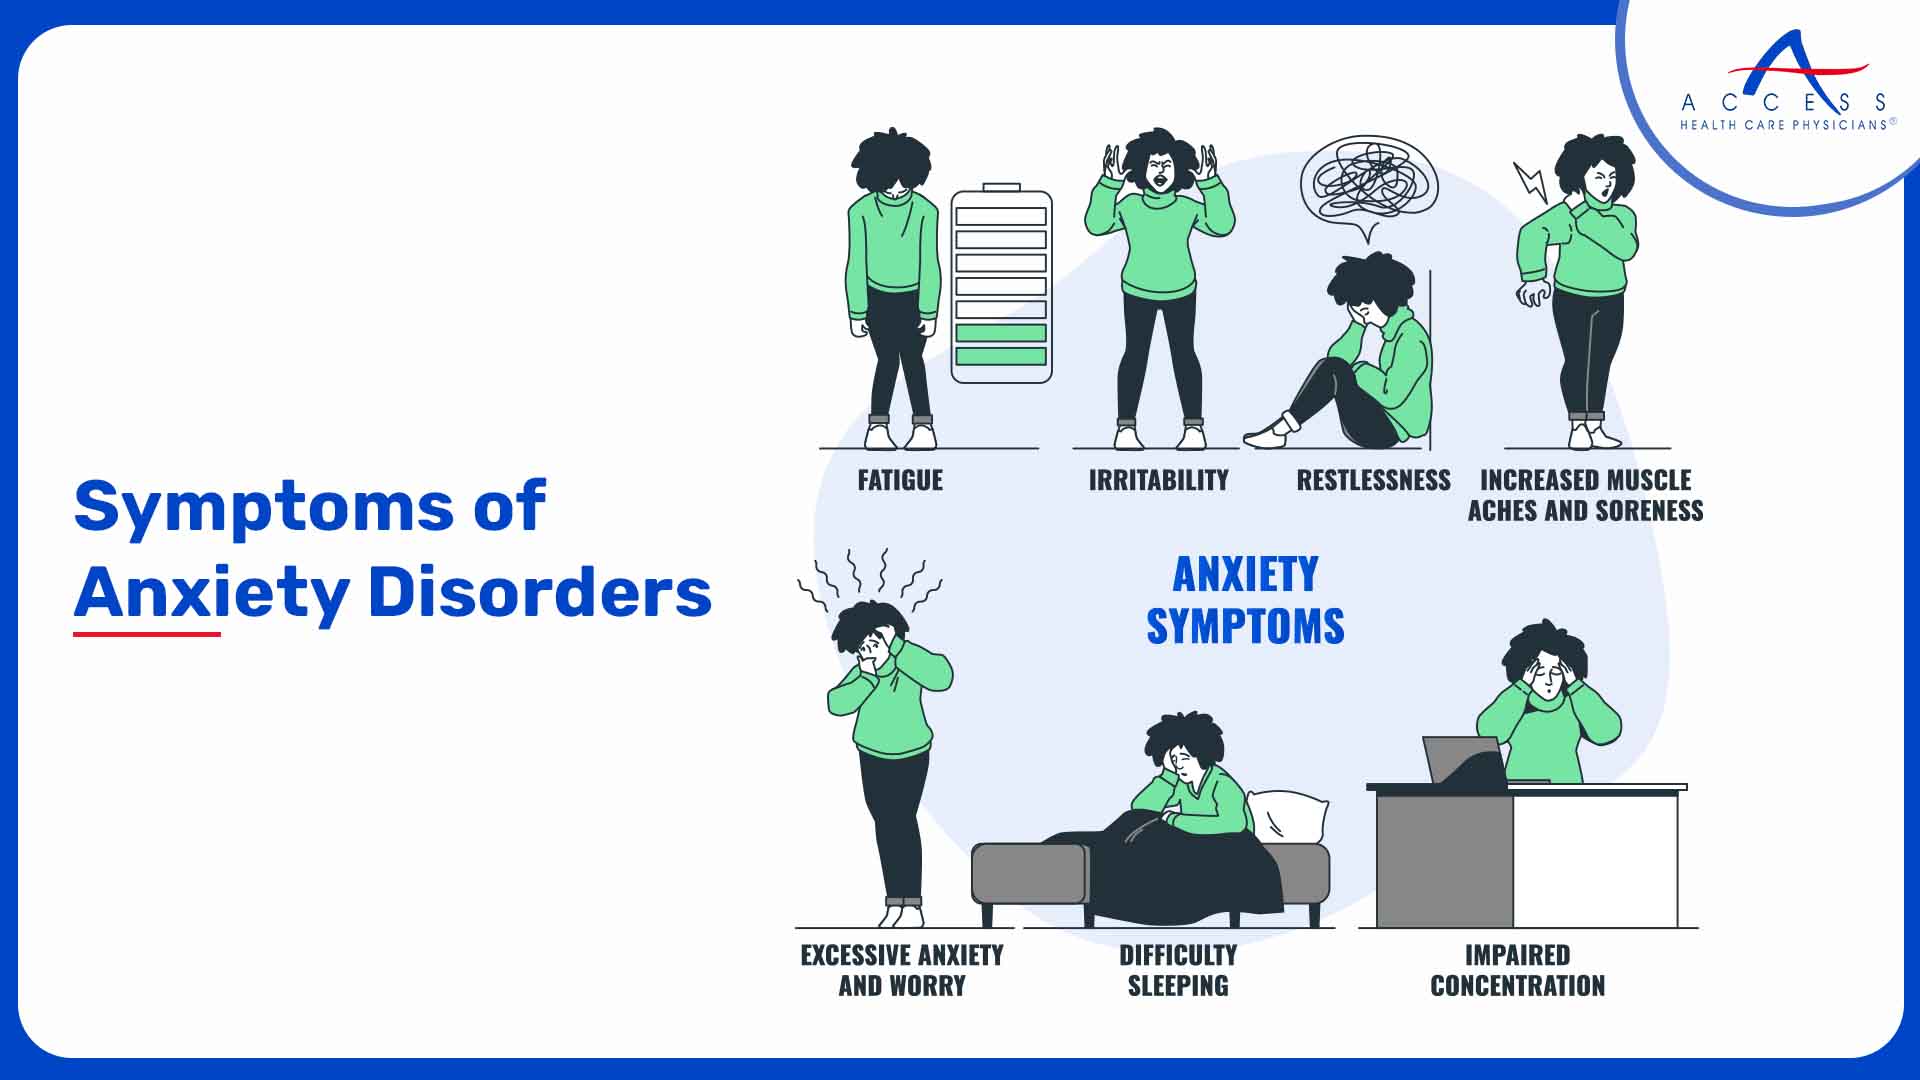 Recognizing the Signs: Symptoms of Anxiety Disorders